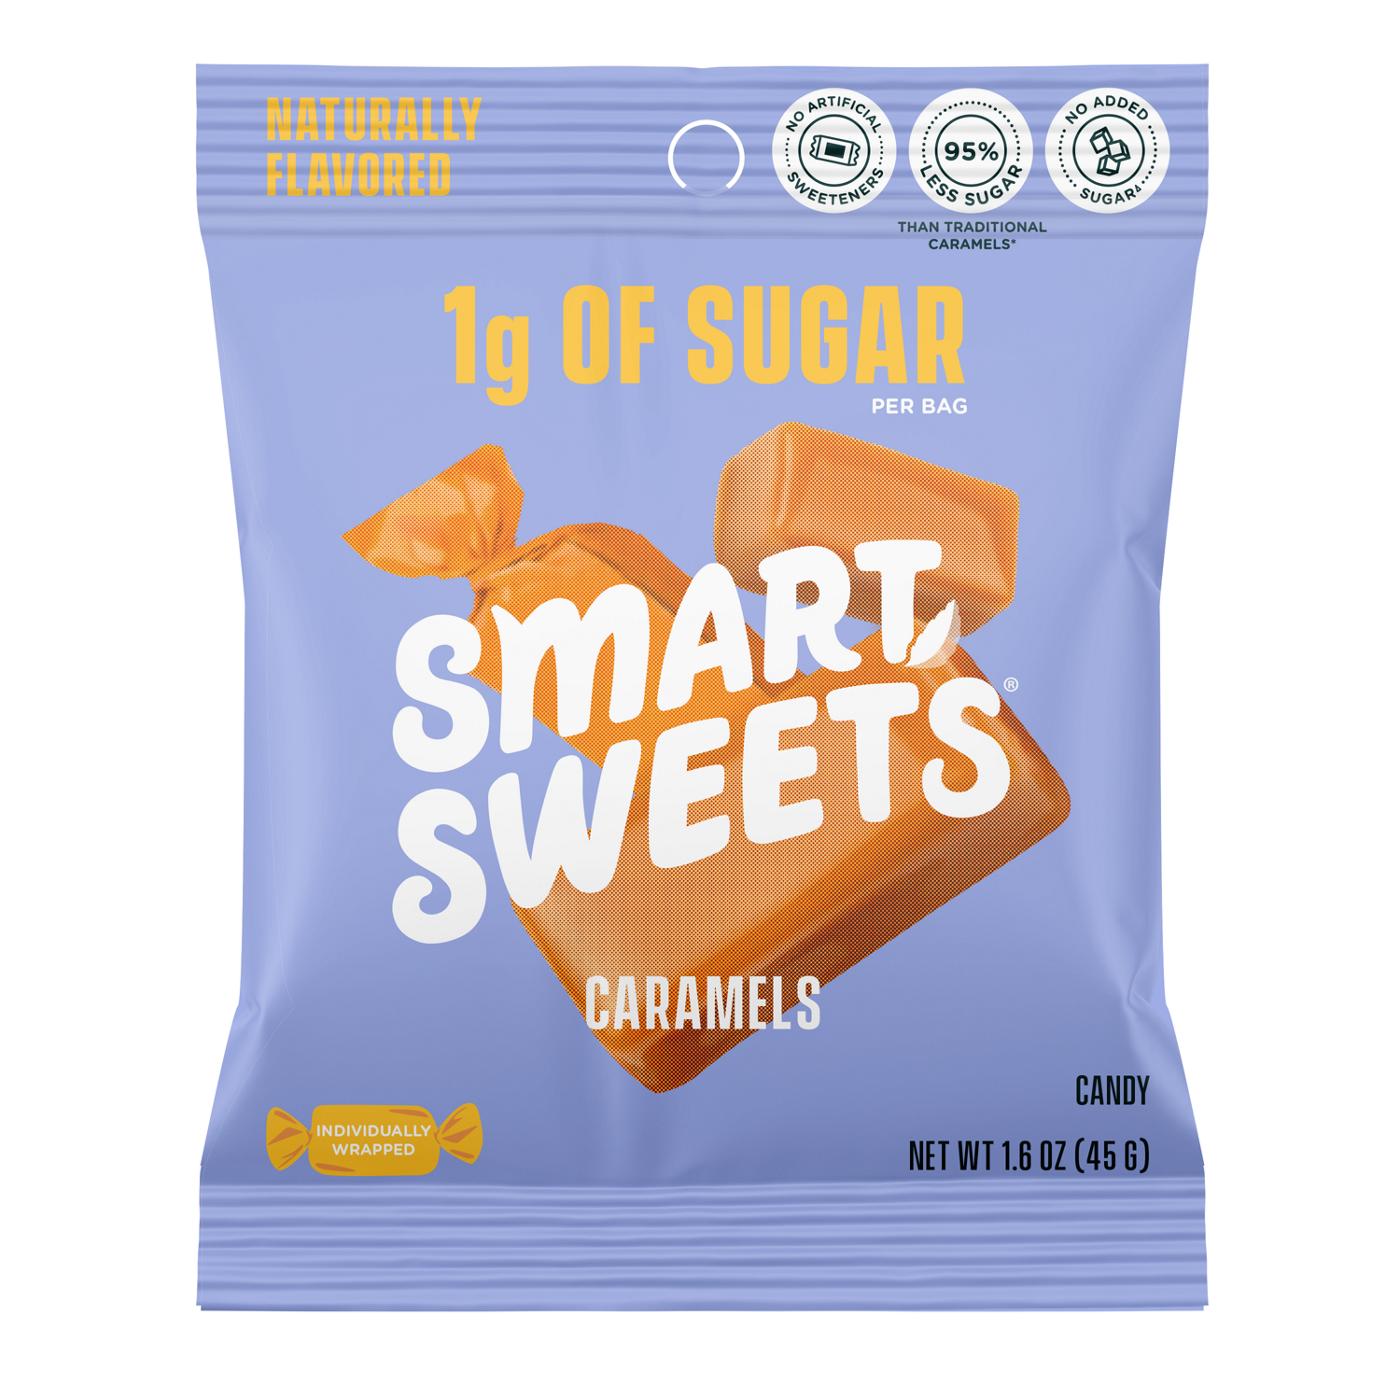 SmartSweets Caramels Candy; image 1 of 2